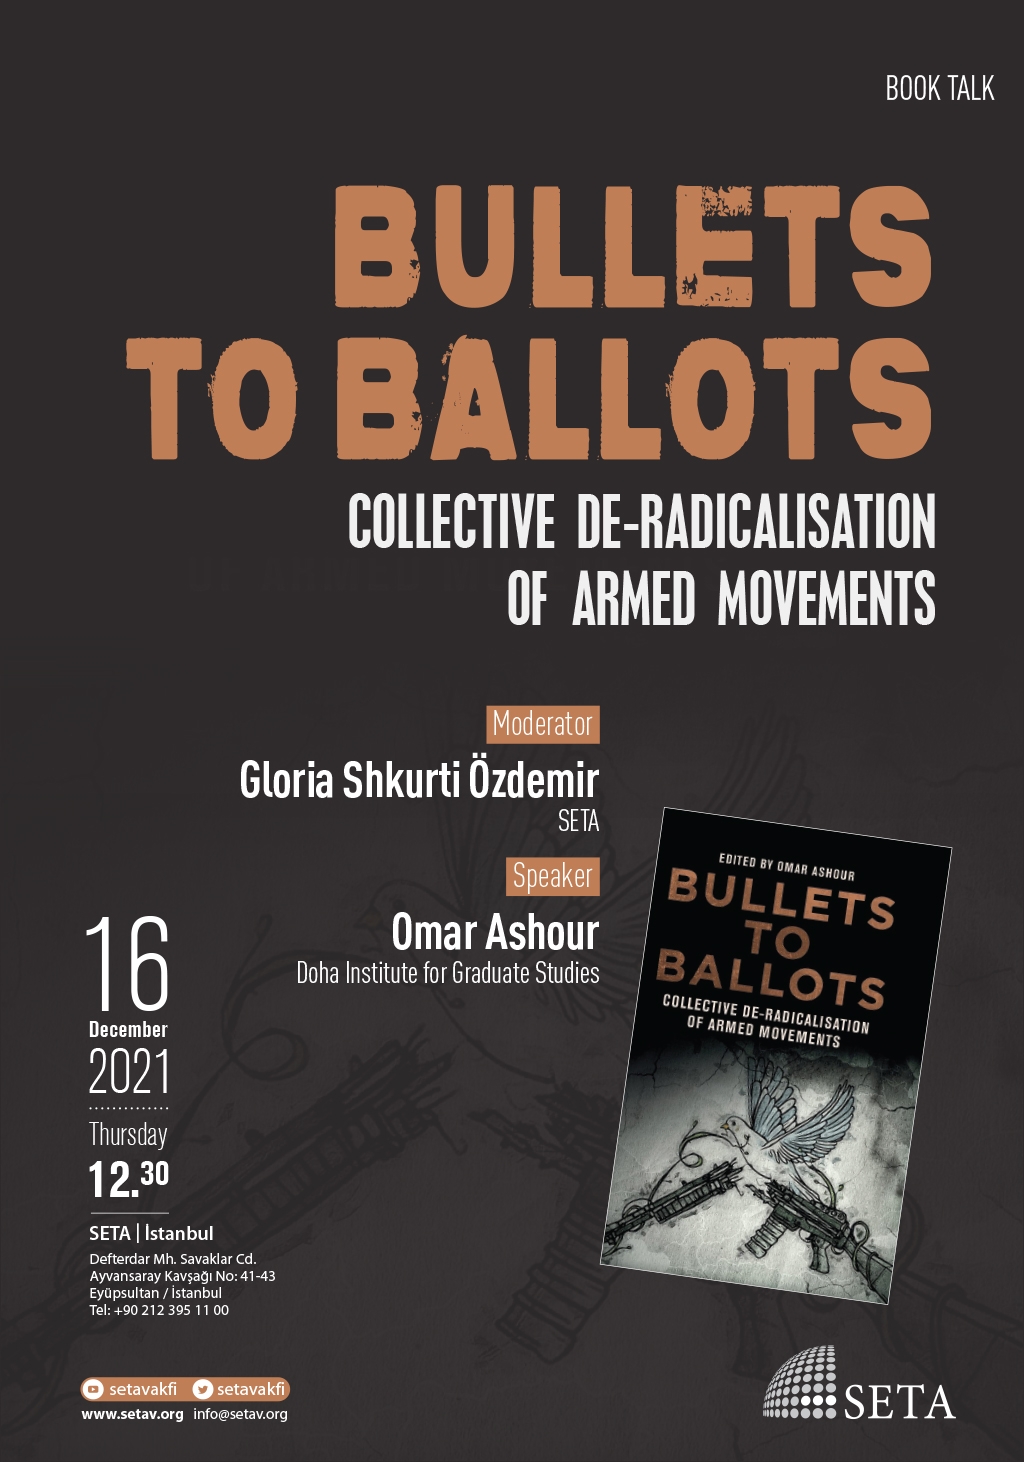 Podcast Book Talk Bullets to Ballots Collective De-Radicalisation of Armed